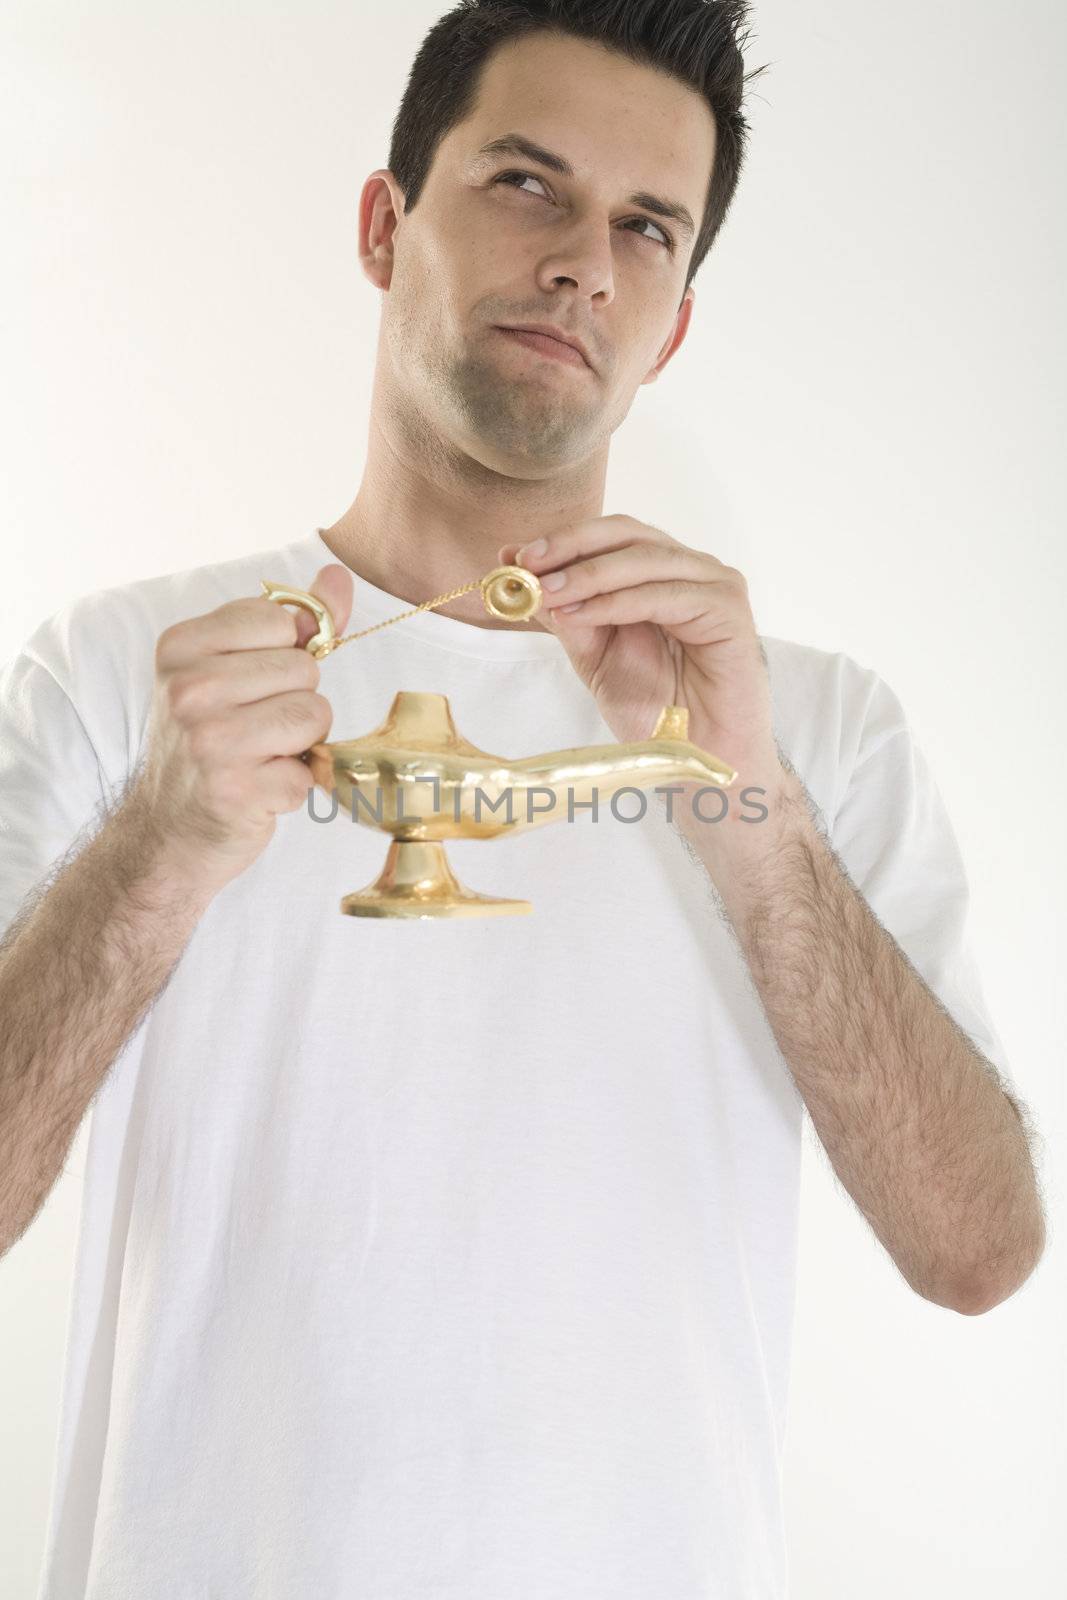 A young, caucasian male, holding a golden magic lamp.